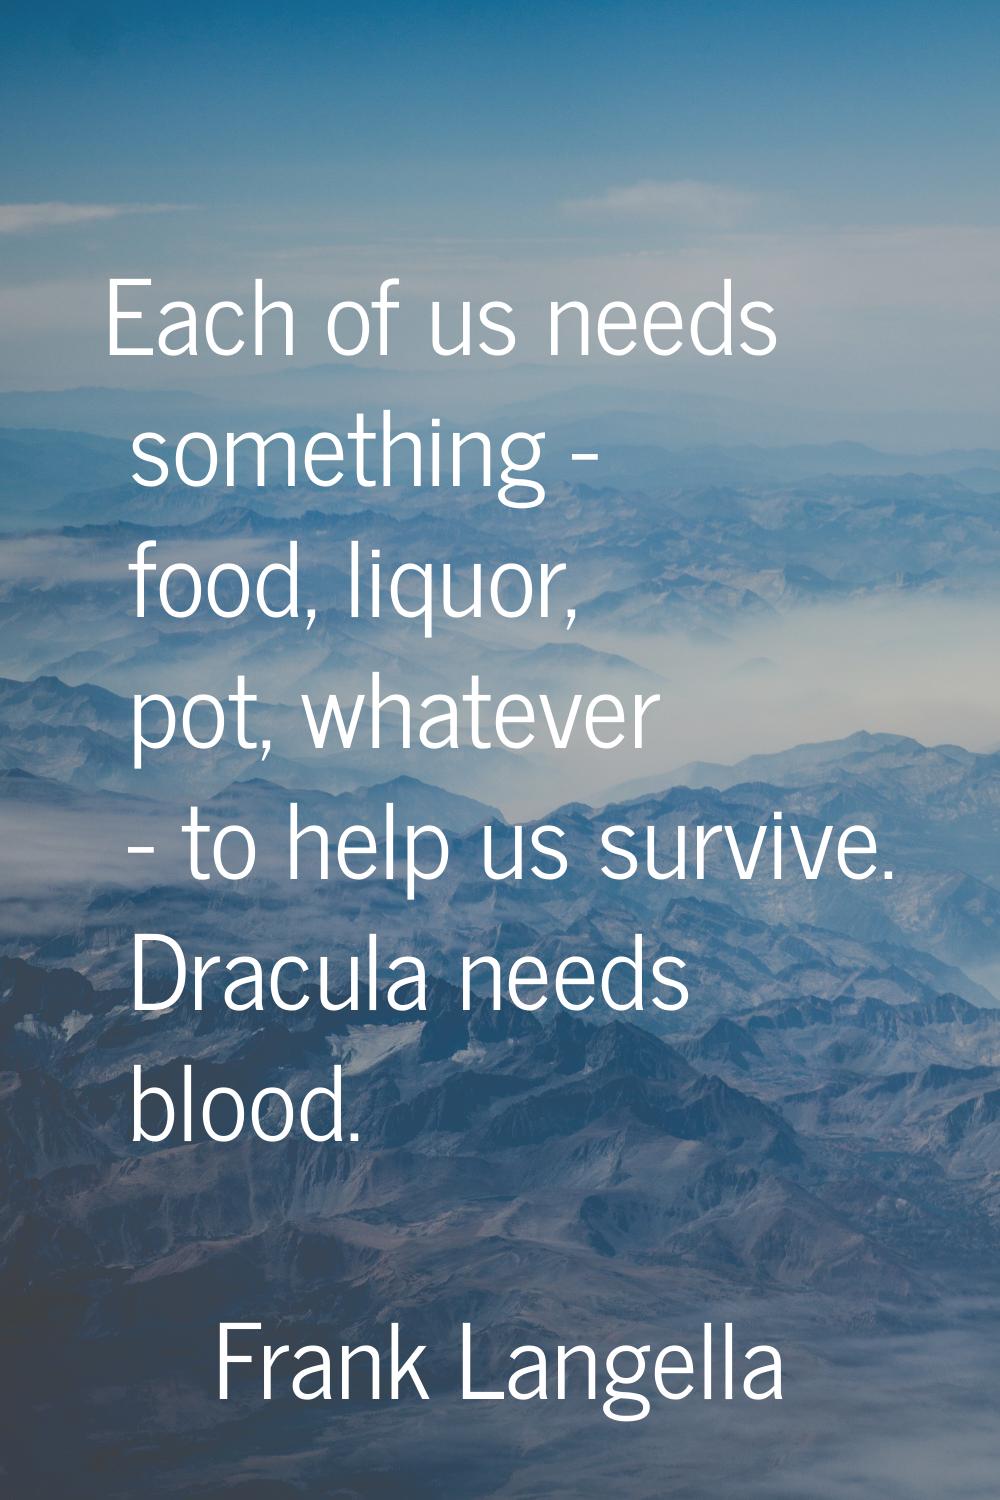 Each of us needs something - food, liquor, pot, whatever - to help us survive. Dracula needs blood.